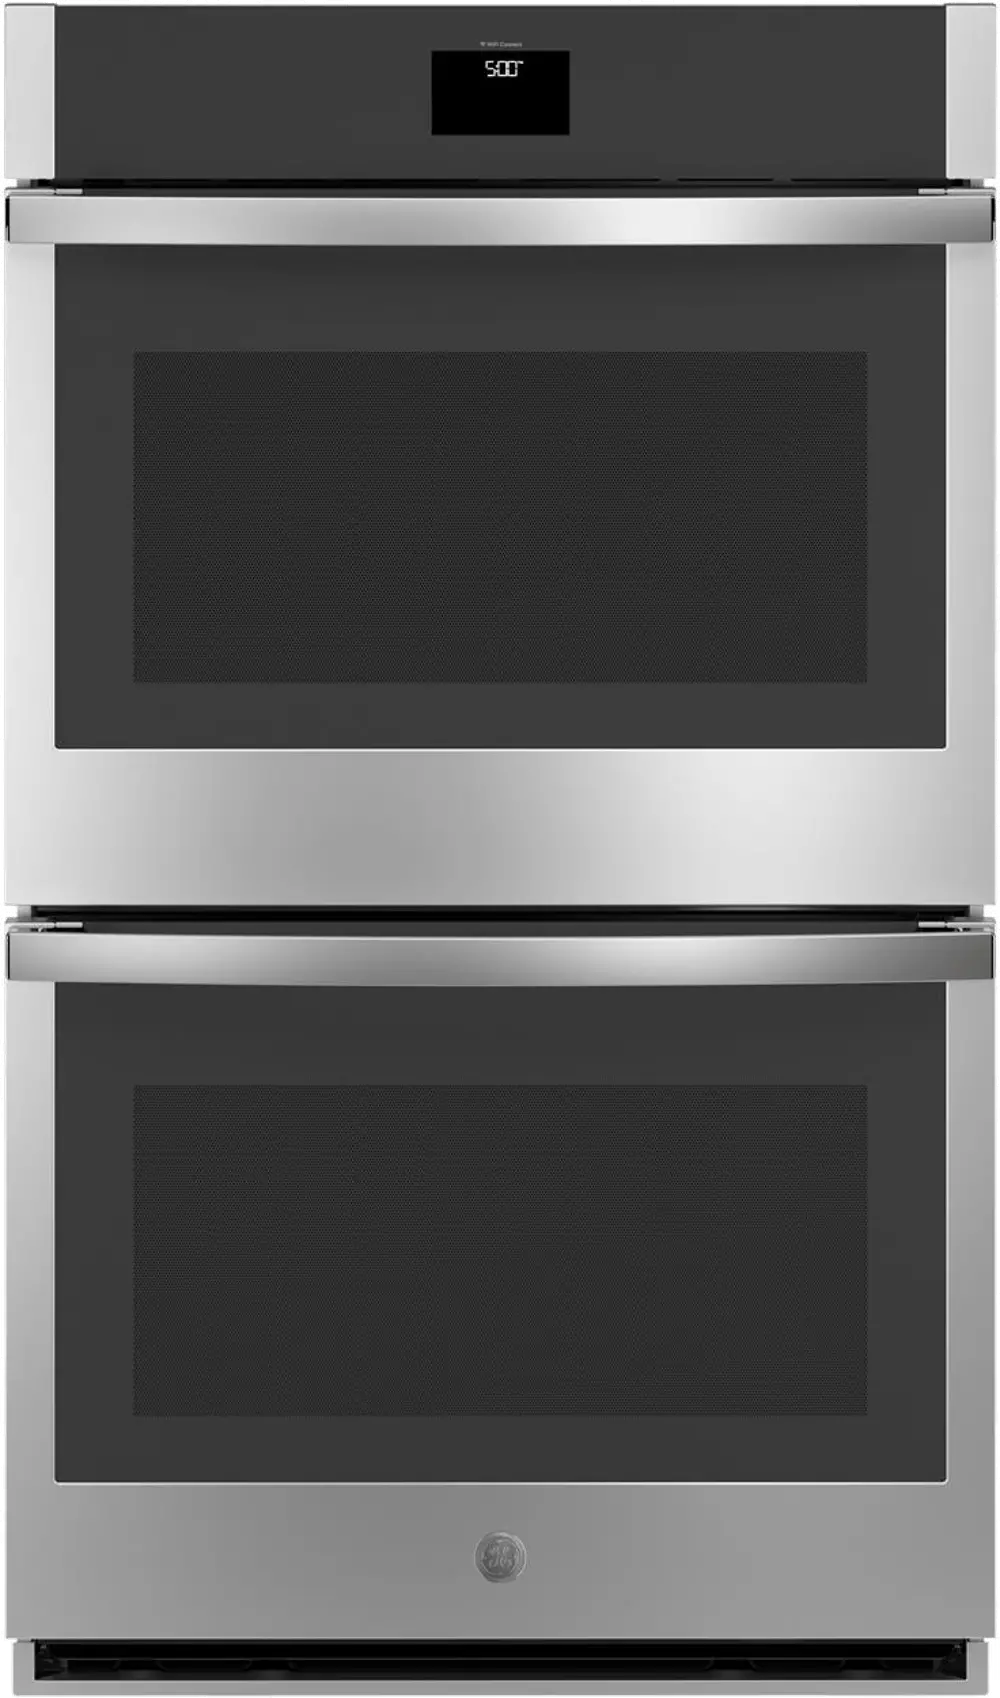 JTD5000SNSS GE 10 cu ft Double Wall Oven - Stainless Steel 30 Inch-1